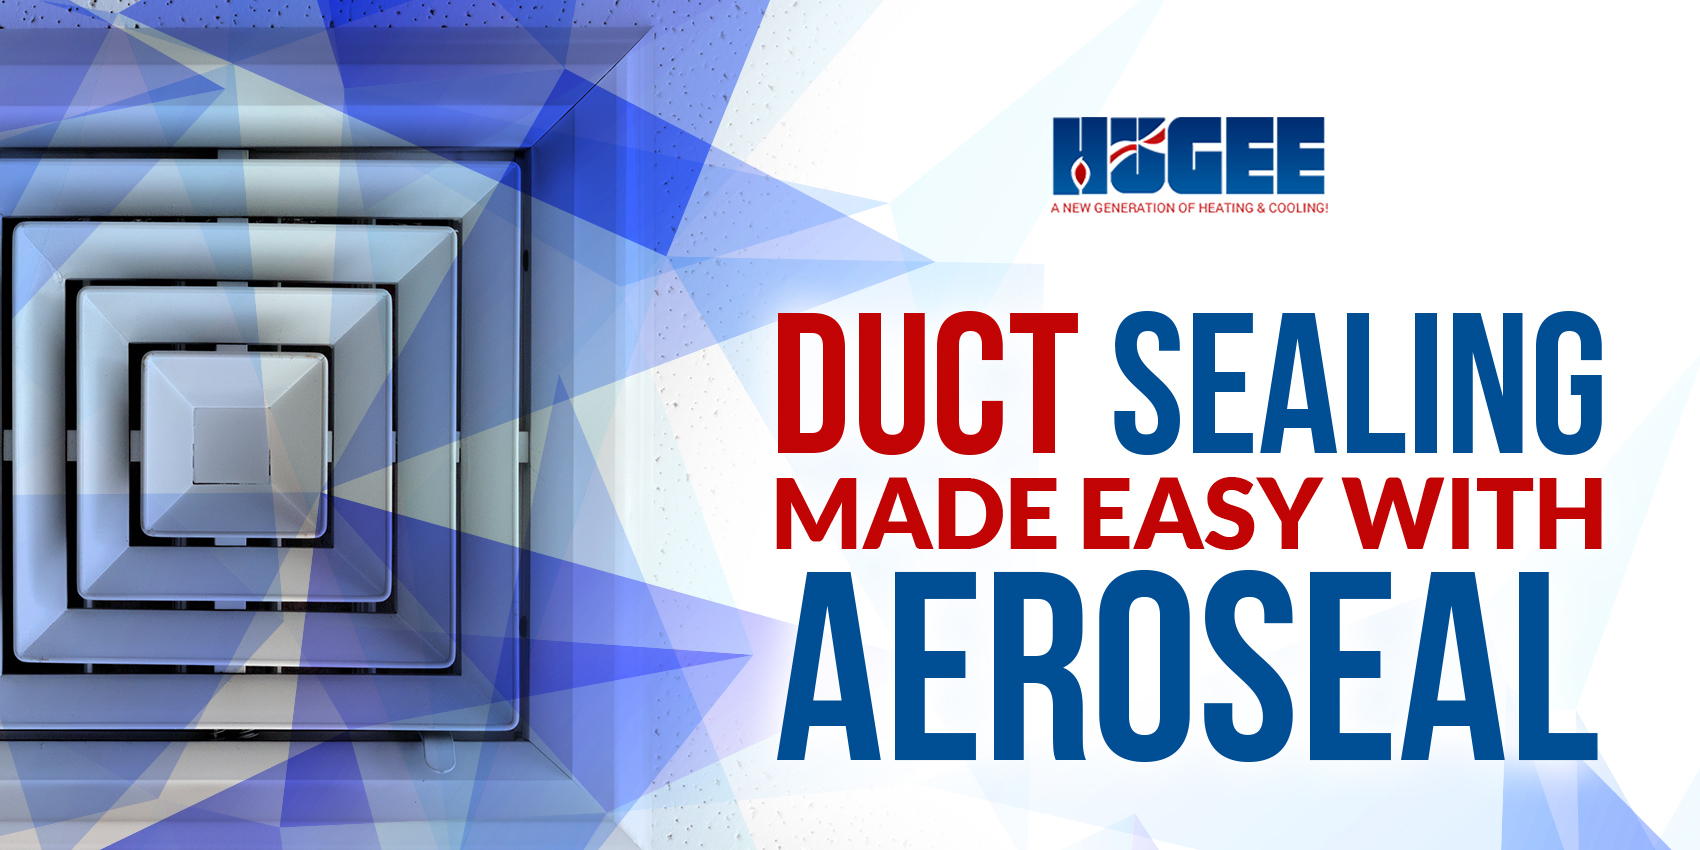 Duct Sealing Made Easy With Aeroseal!